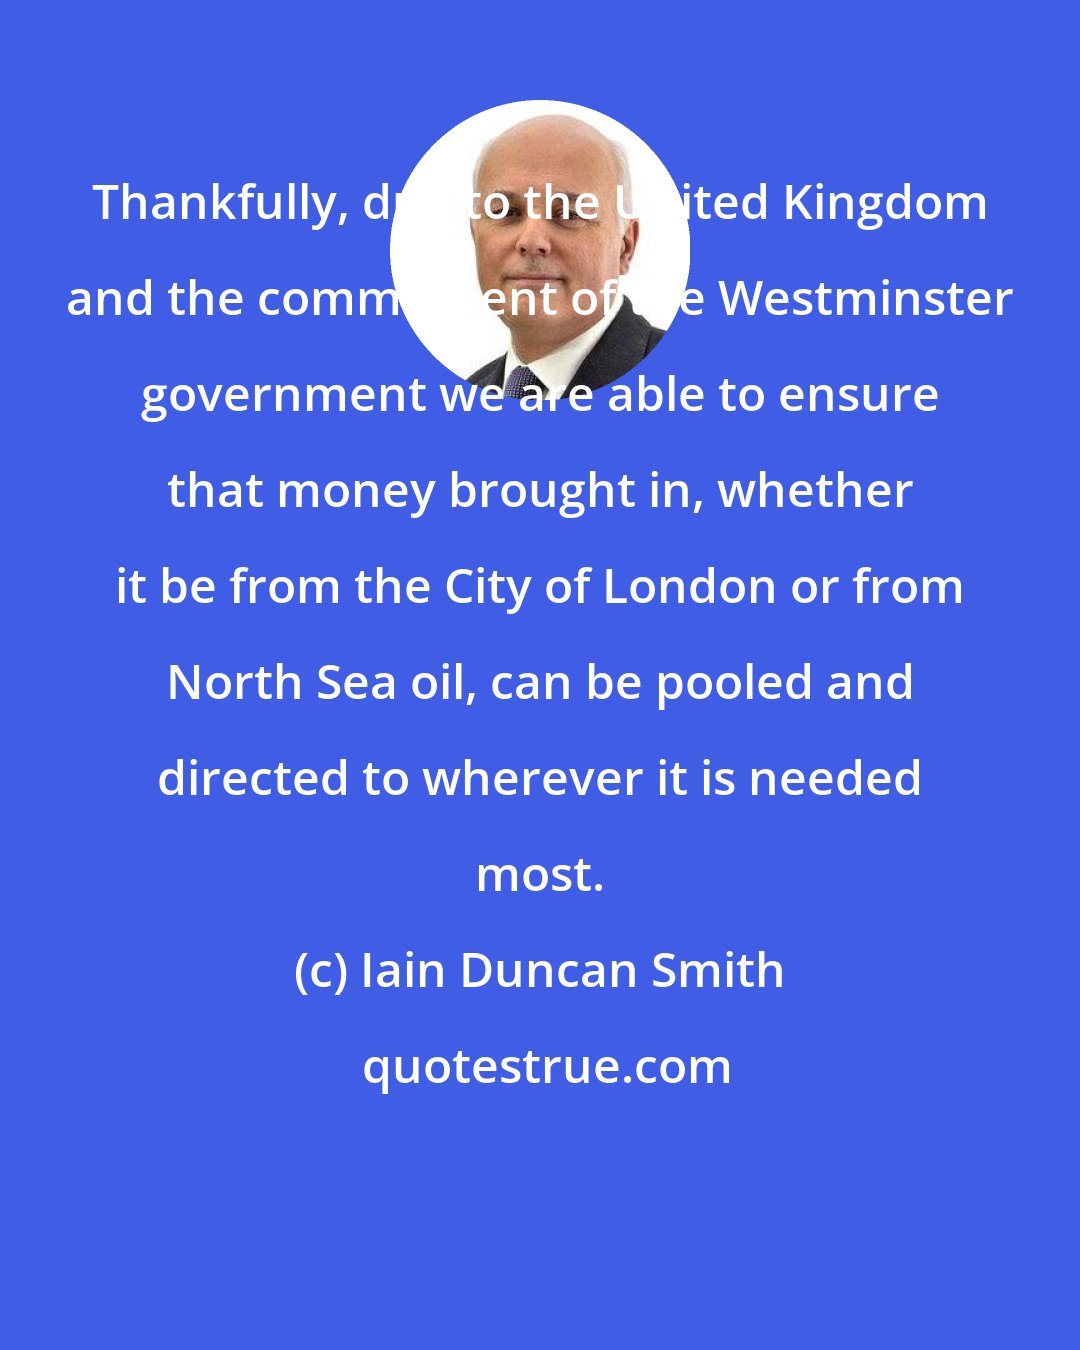 Iain Duncan Smith: Thankfully, due to the United Kingdom and the commitment of the Westminster government we are able to ensure that money brought in, whether it be from the City of London or from North Sea oil, can be pooled and directed to wherever it is needed most.